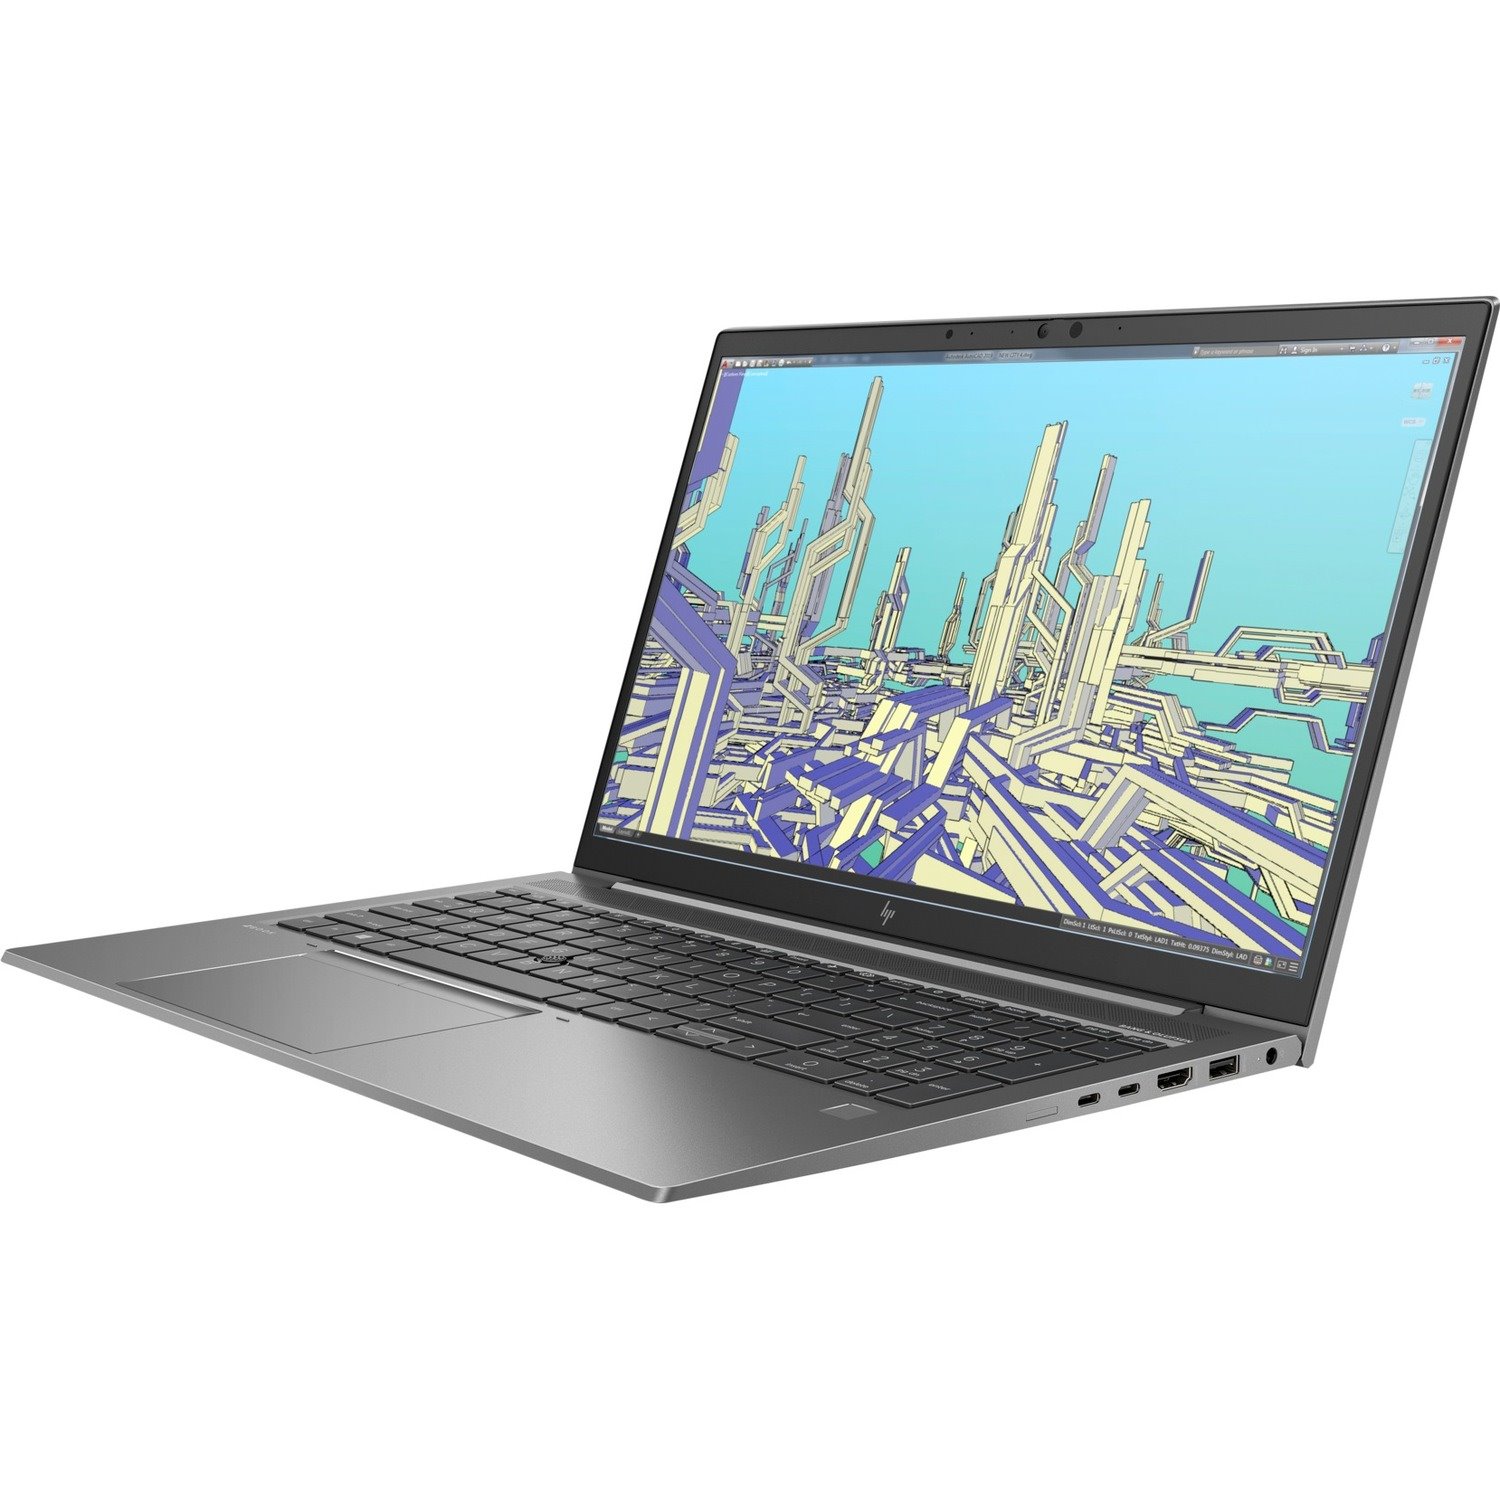 HP ZBook Firefly 15 G8 LTE 15.6" Touchscreen Mobile Workstation - Full HD - 1920 x 1080 - Intel Core i7 11th Gen i7-1165G7 Quad-core (4 Core) 2.80 GHz - 16 GB Total RAM - 512 GB SSD